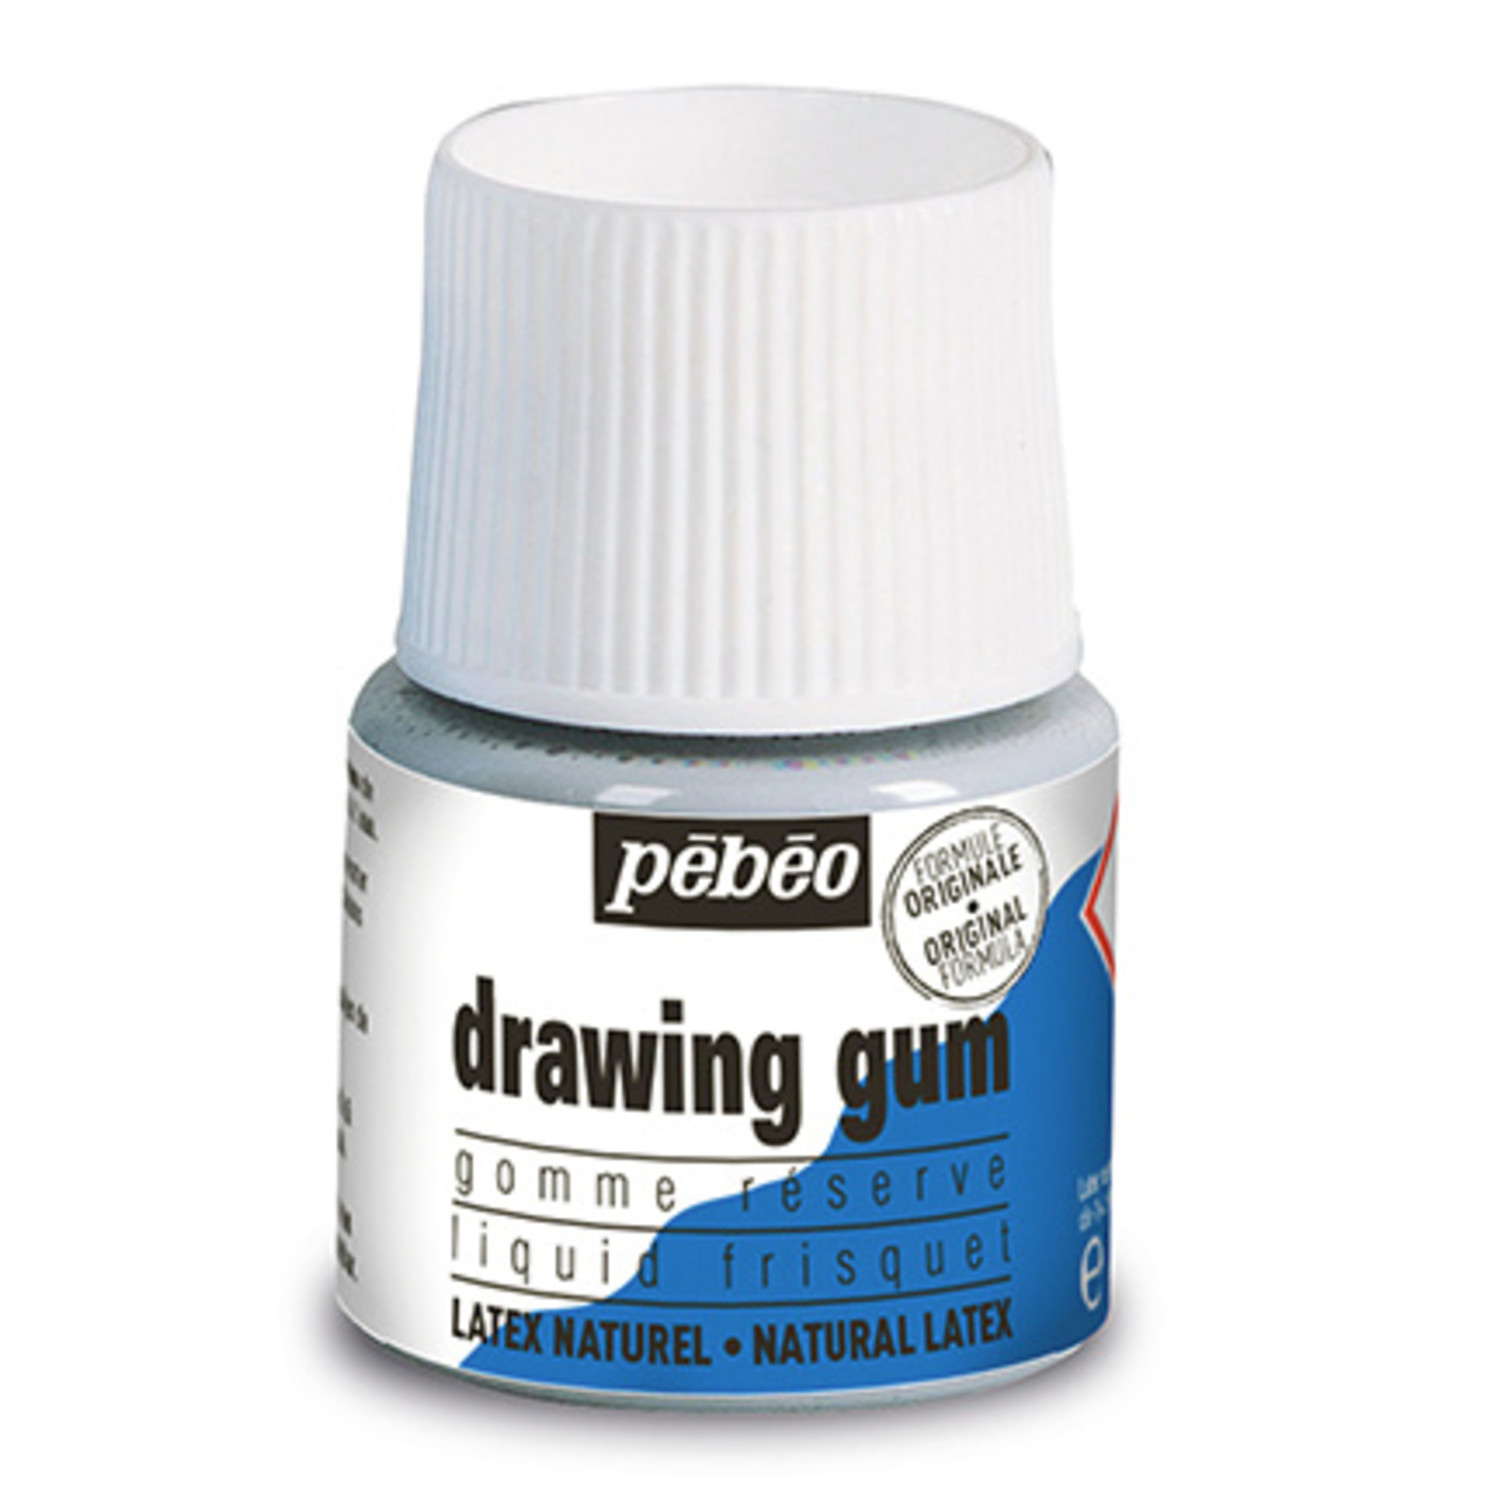 DRAWING GUM MARKER by Pébéo 